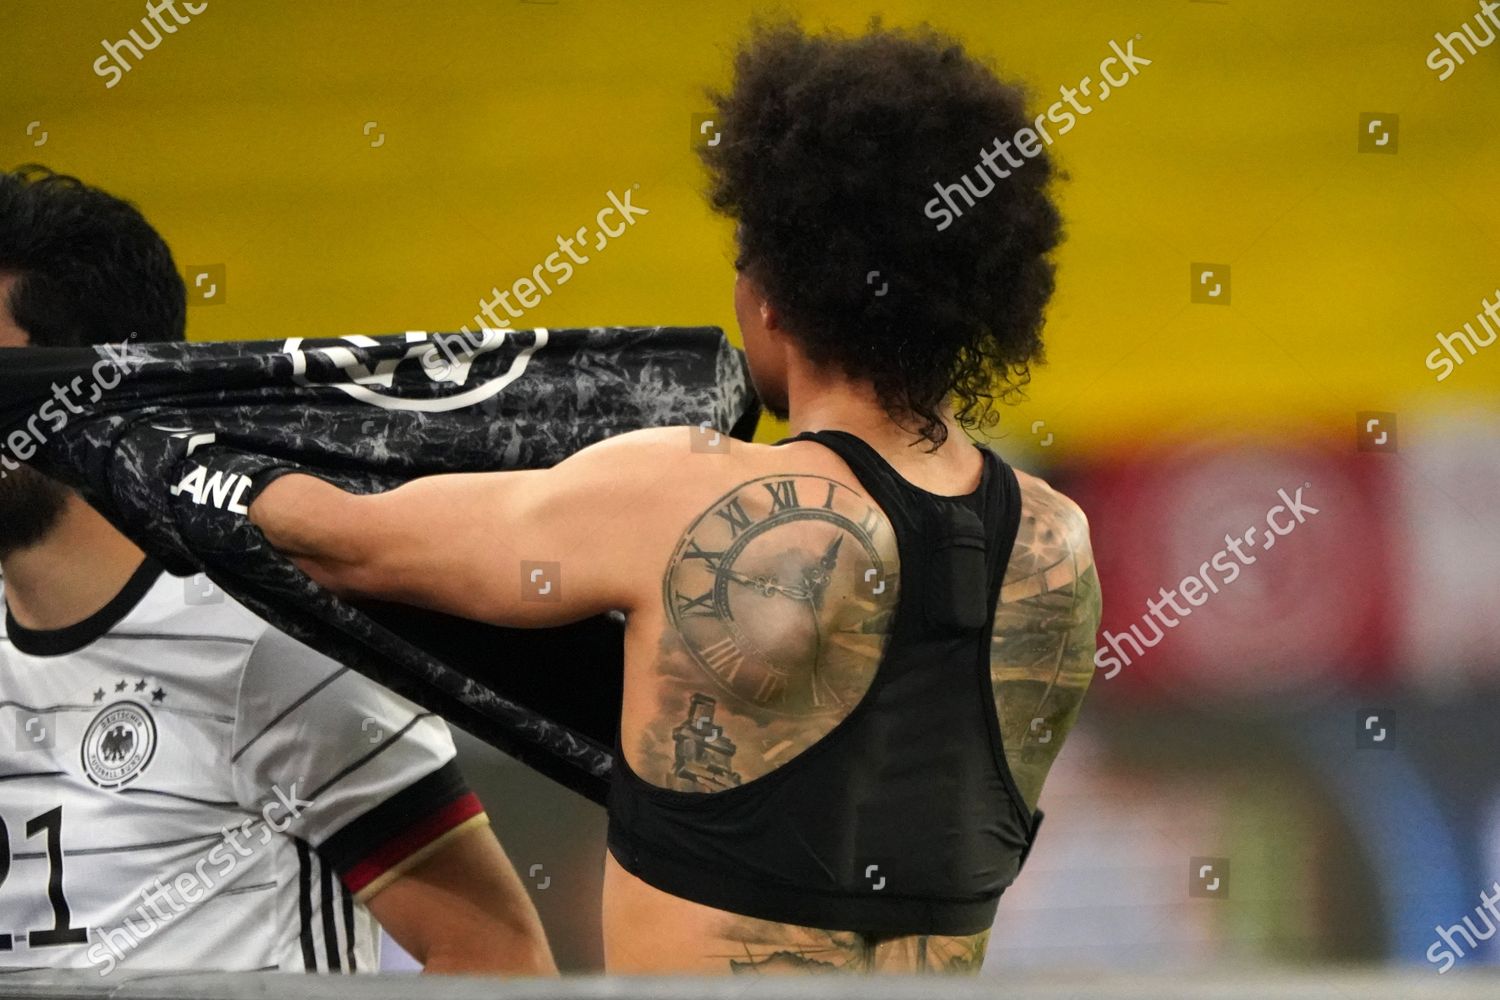 PHOTOS Leroy Sanes reveals tattoo on his back of himself  NBC Sports